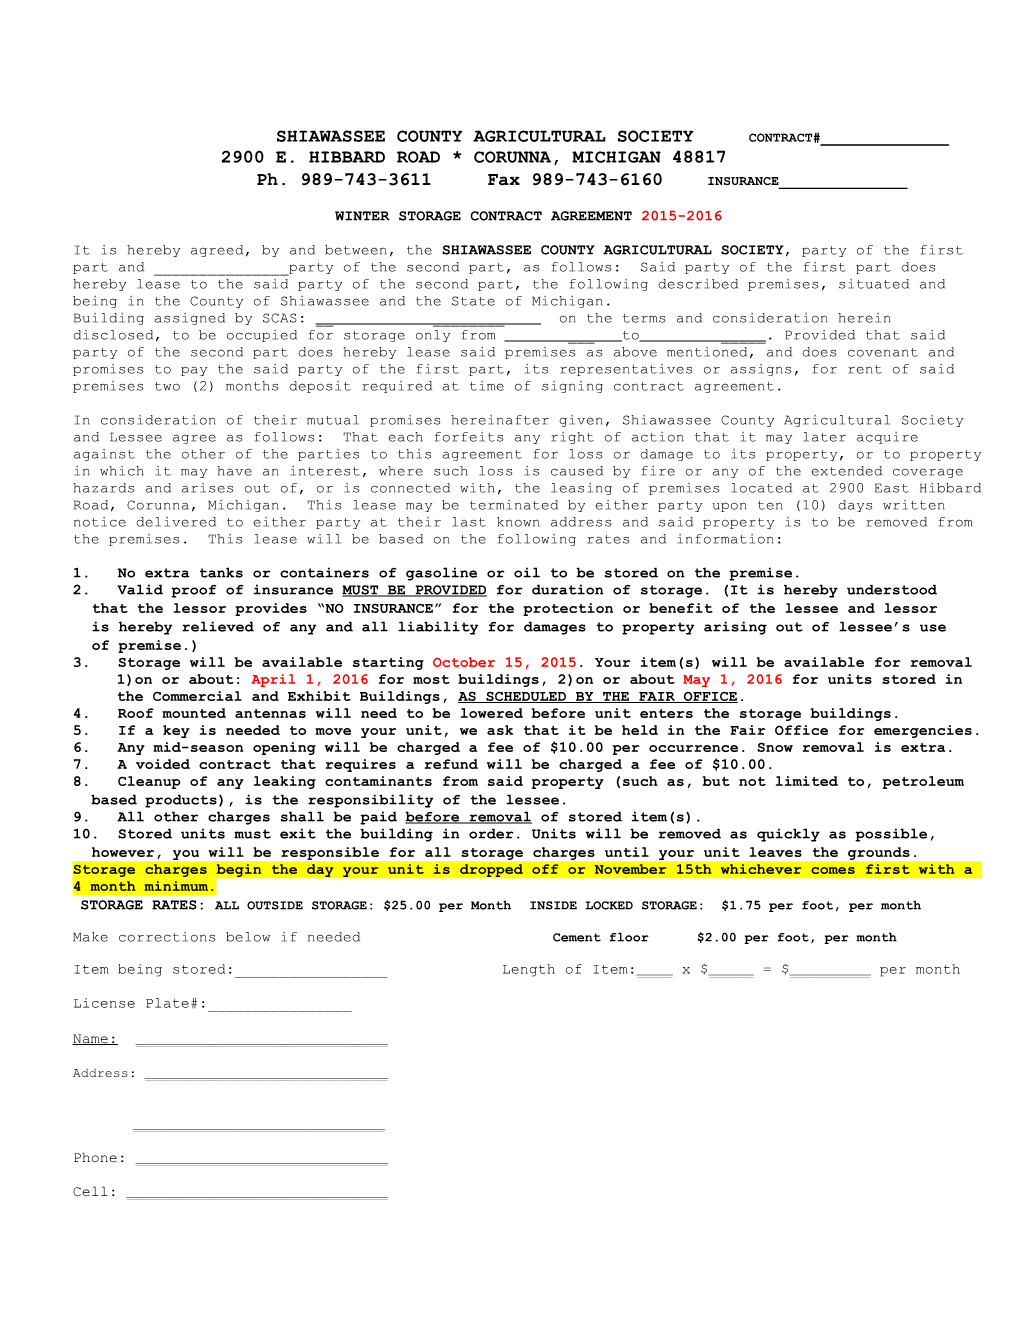 Shiawassee County Agricultural Society Contract#______